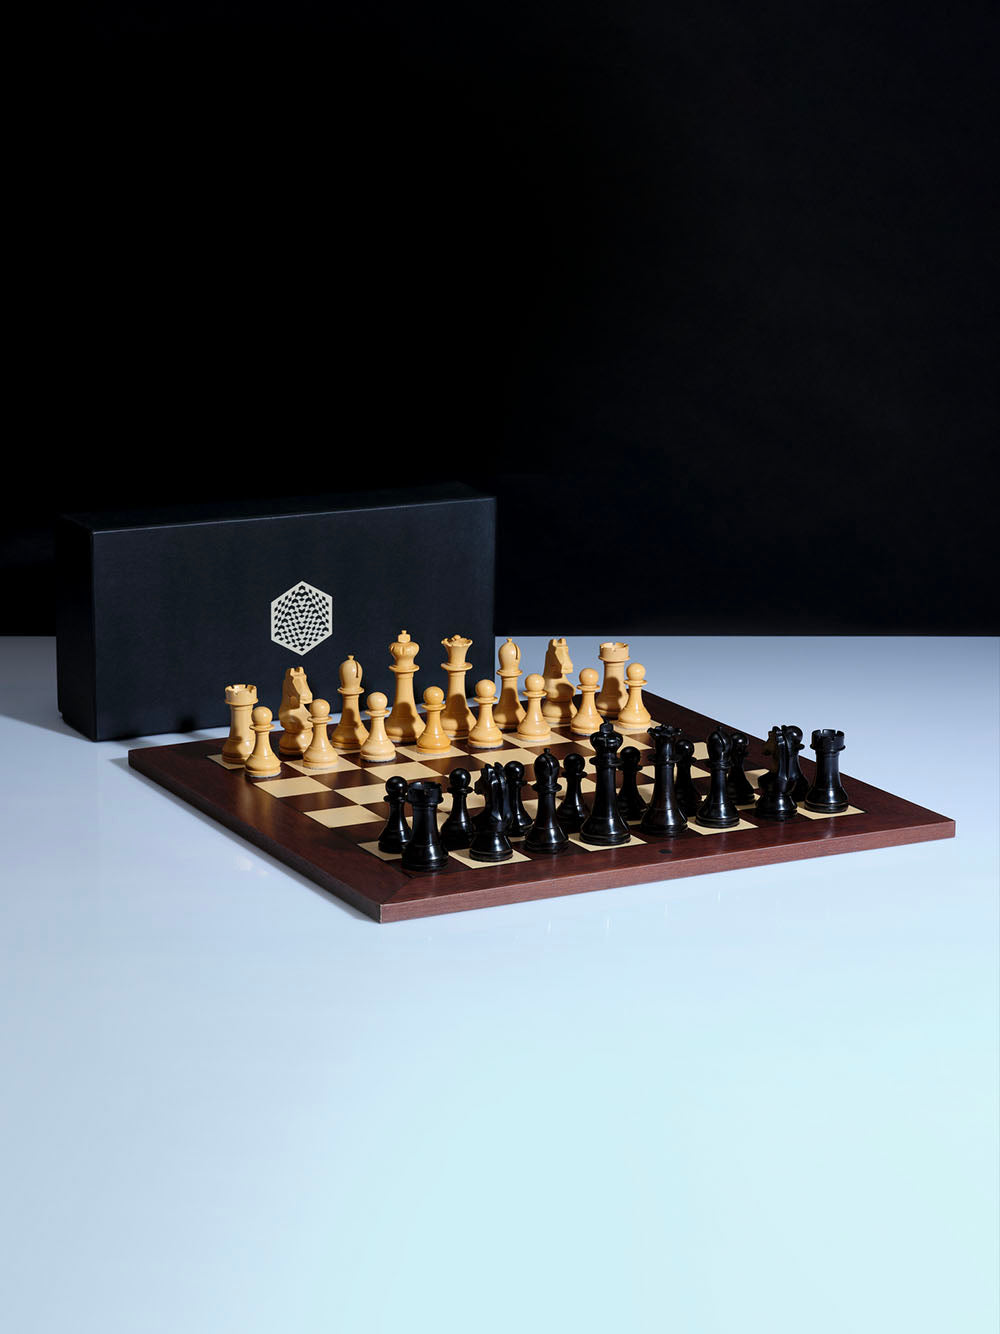 Black Friday Deals 2022 on Chess Products